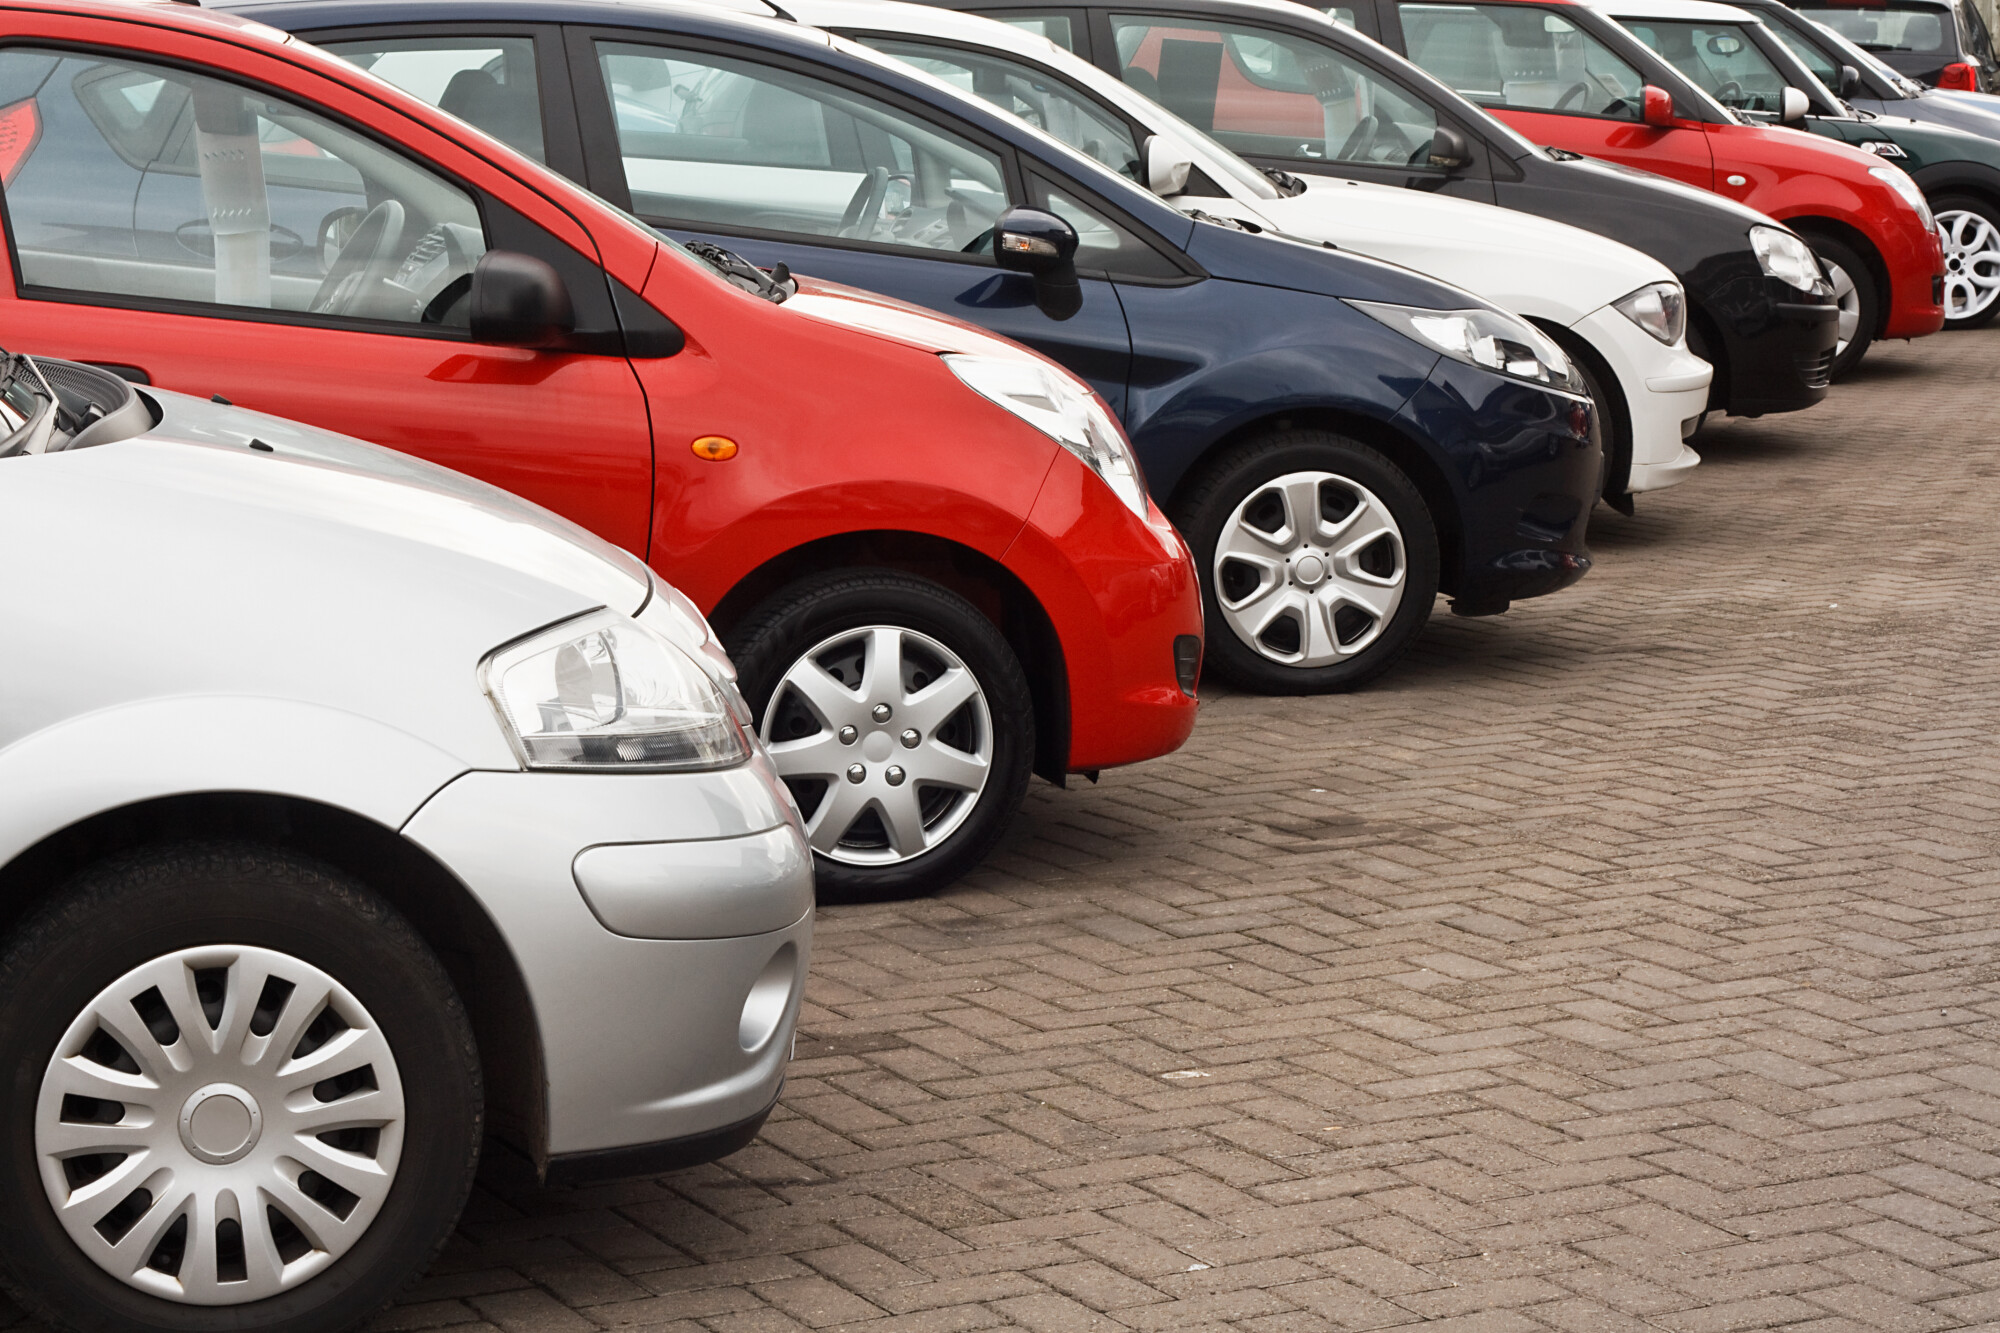 New Vs. Used Car: Which Is Right For You?